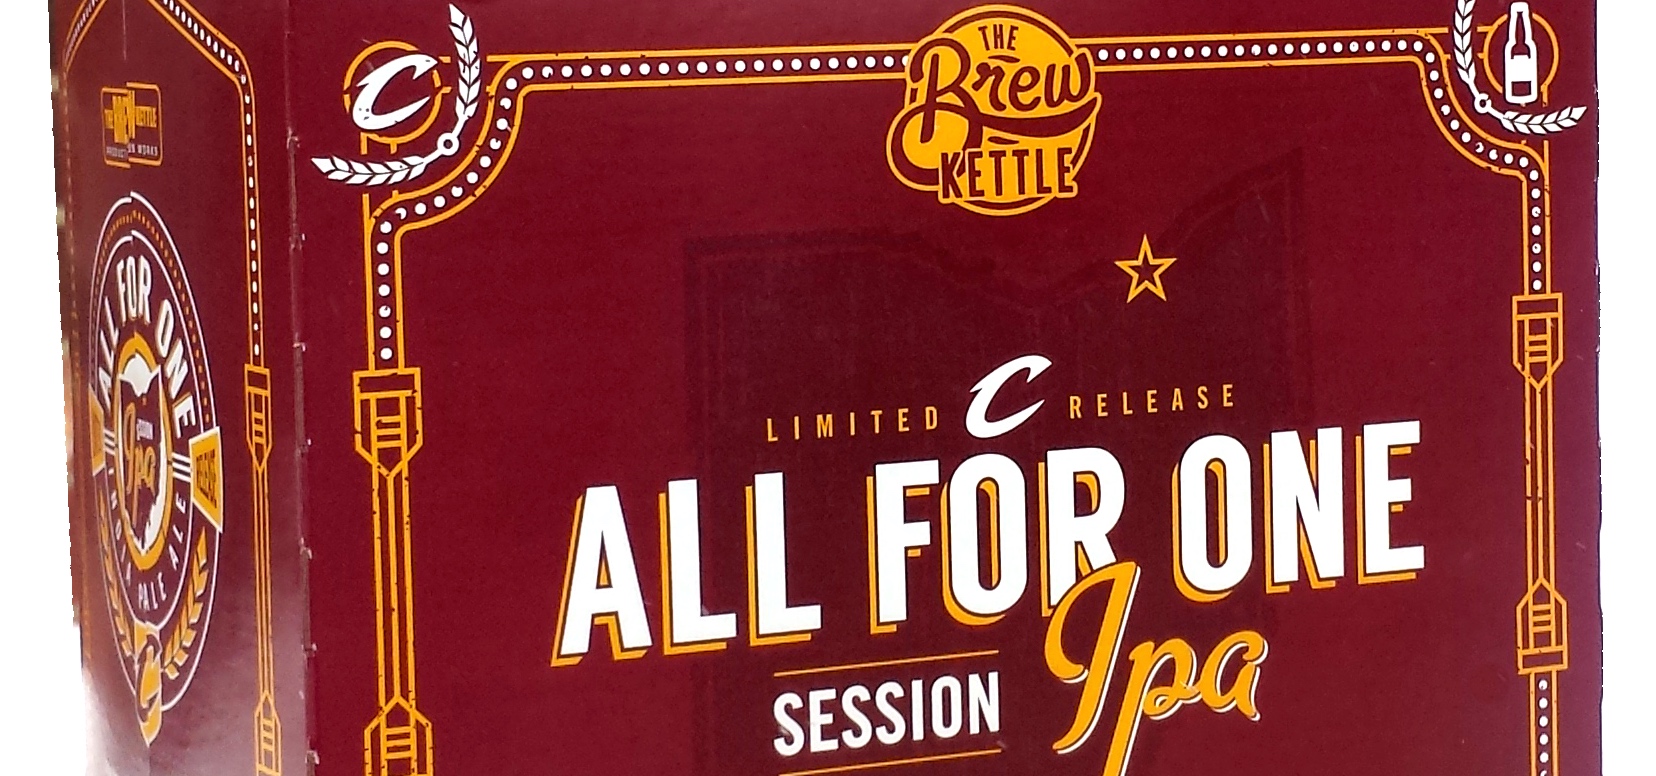 The Brew Kettle | All for One Session IPA